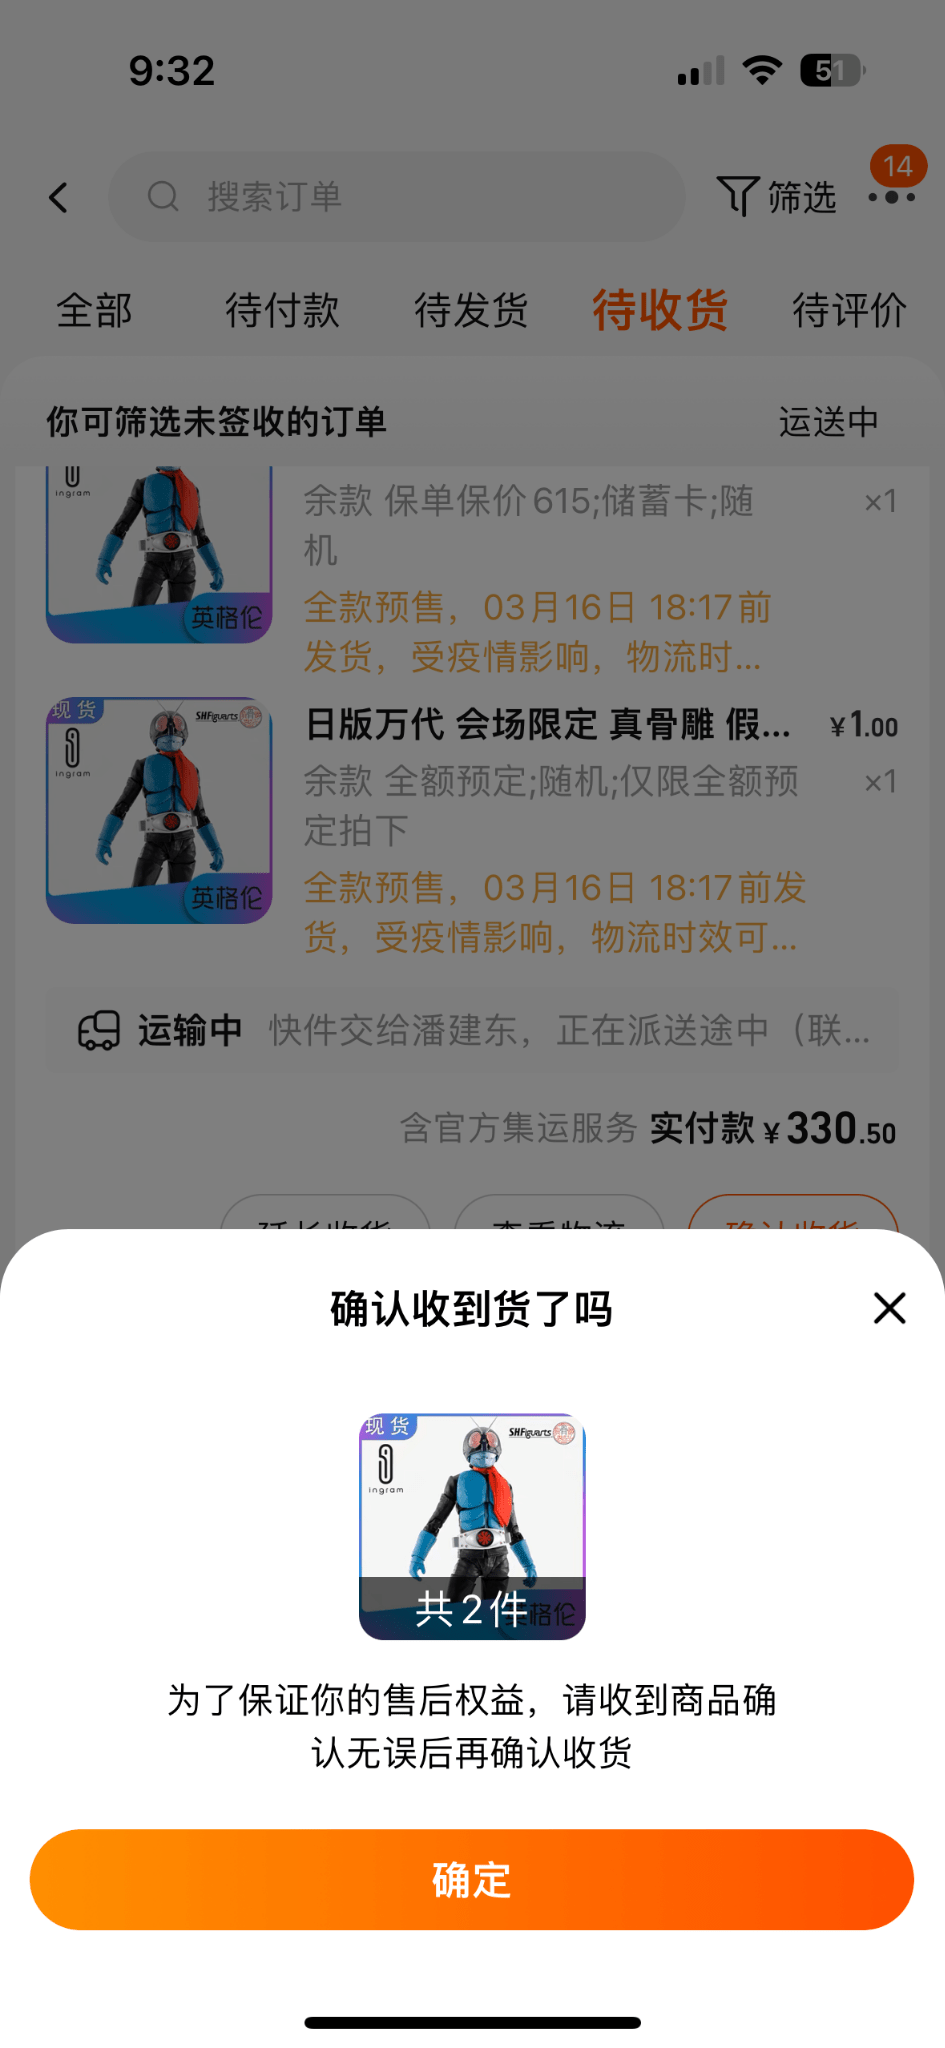 Confirm your received order on mobile